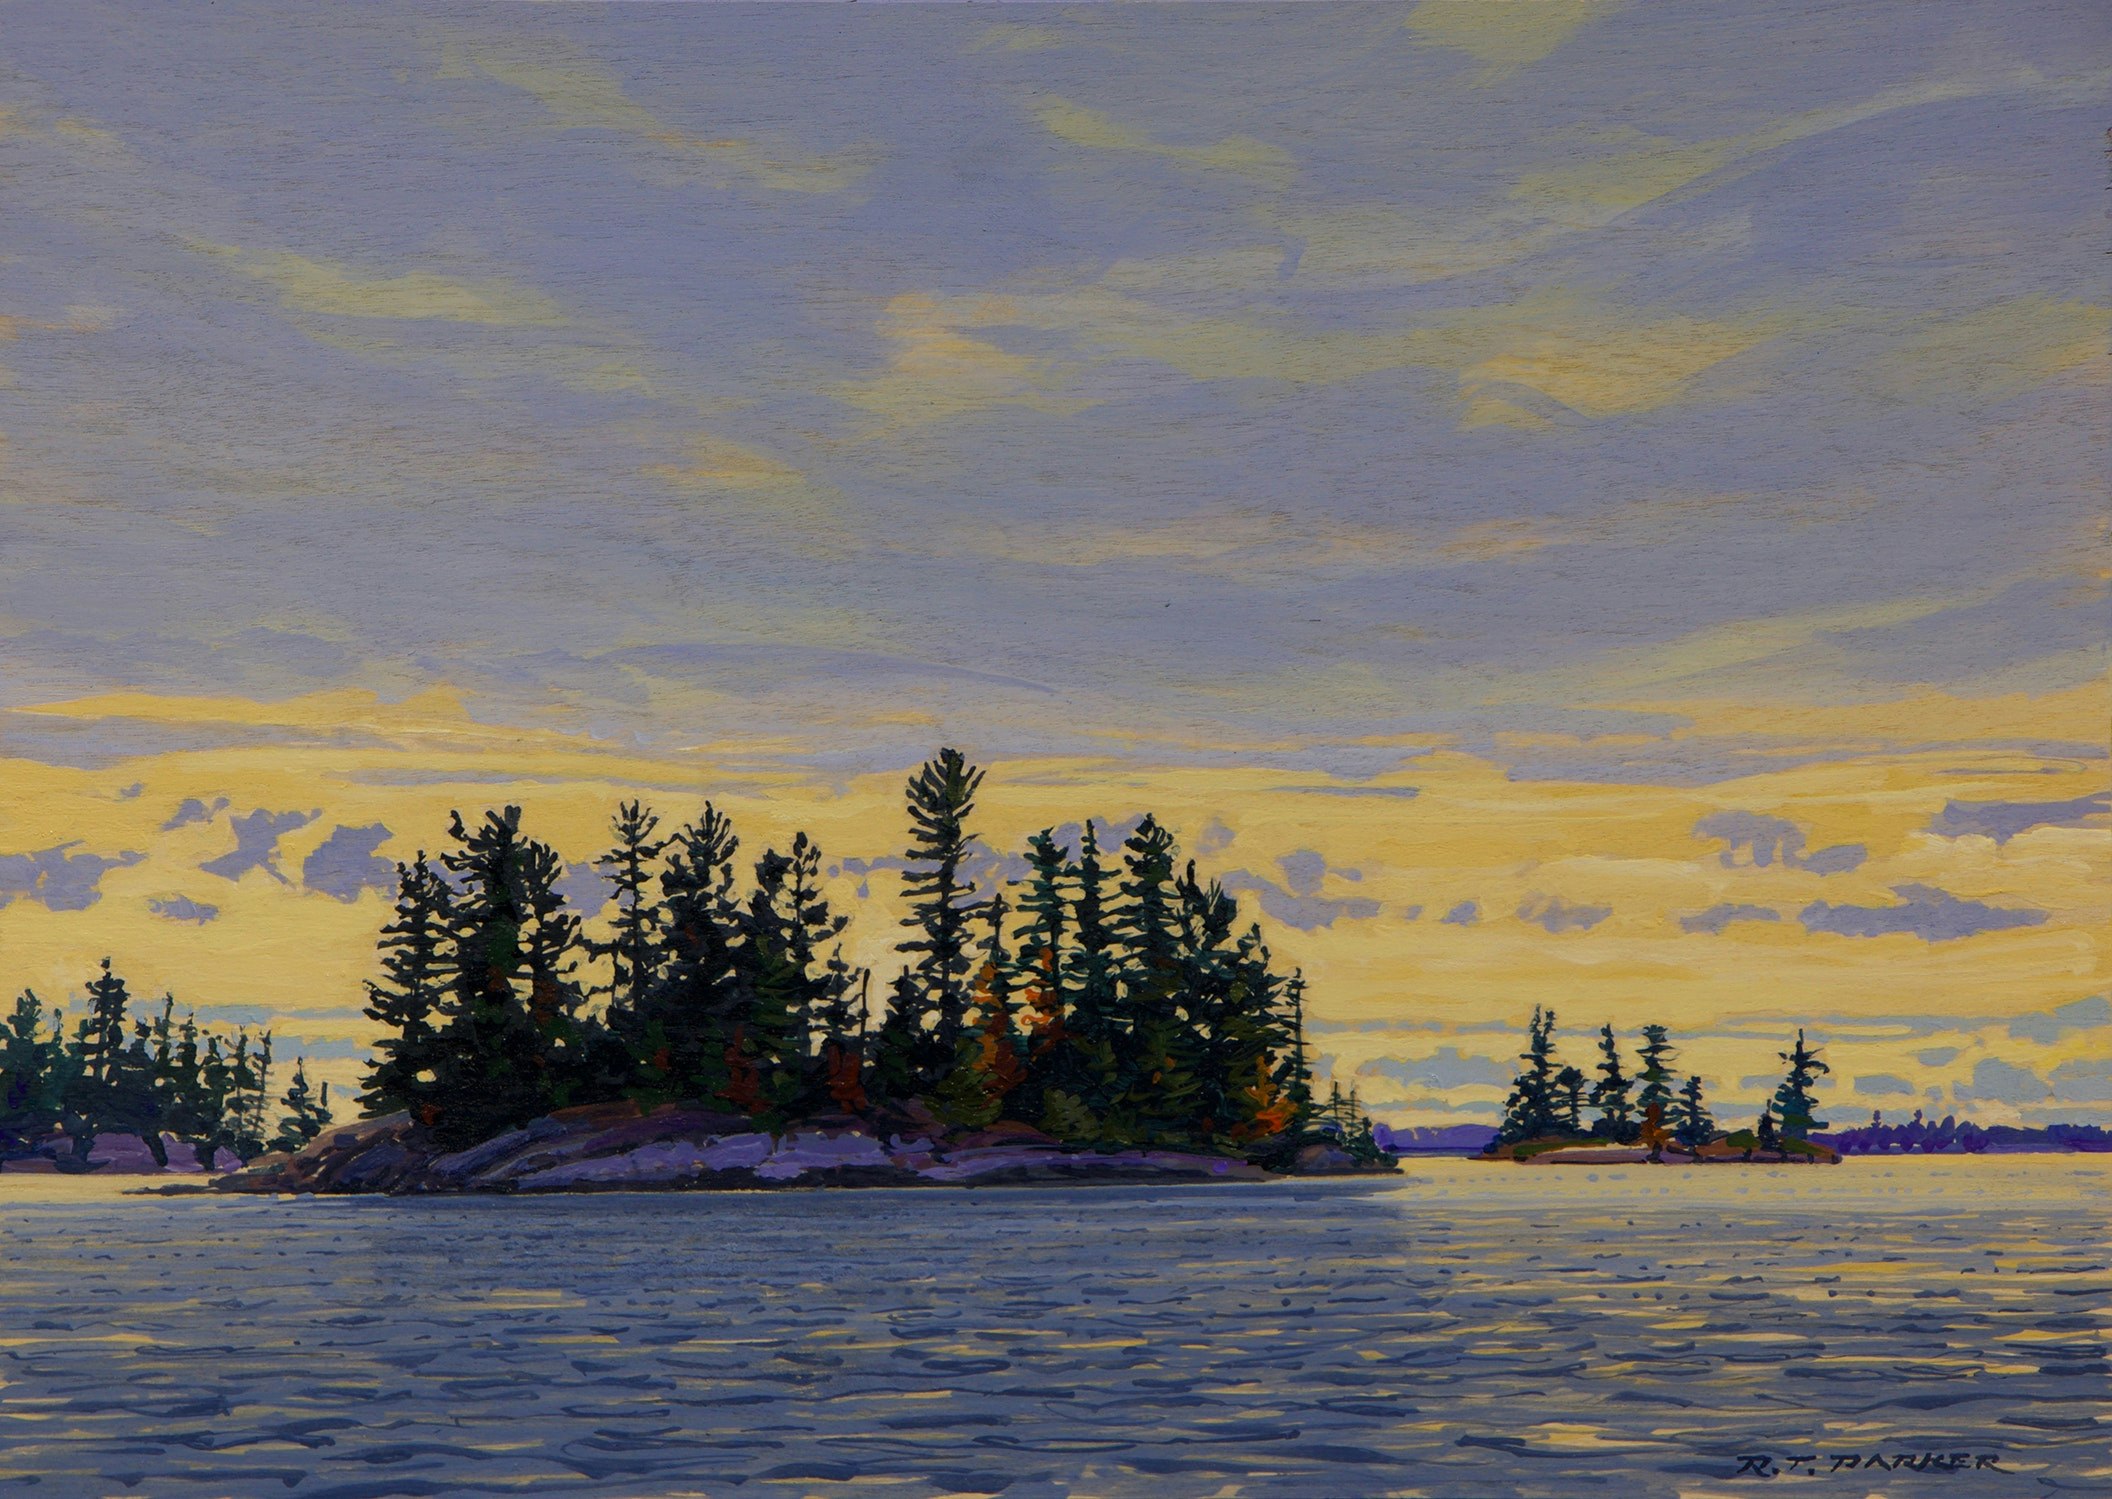 West of Oliver Island